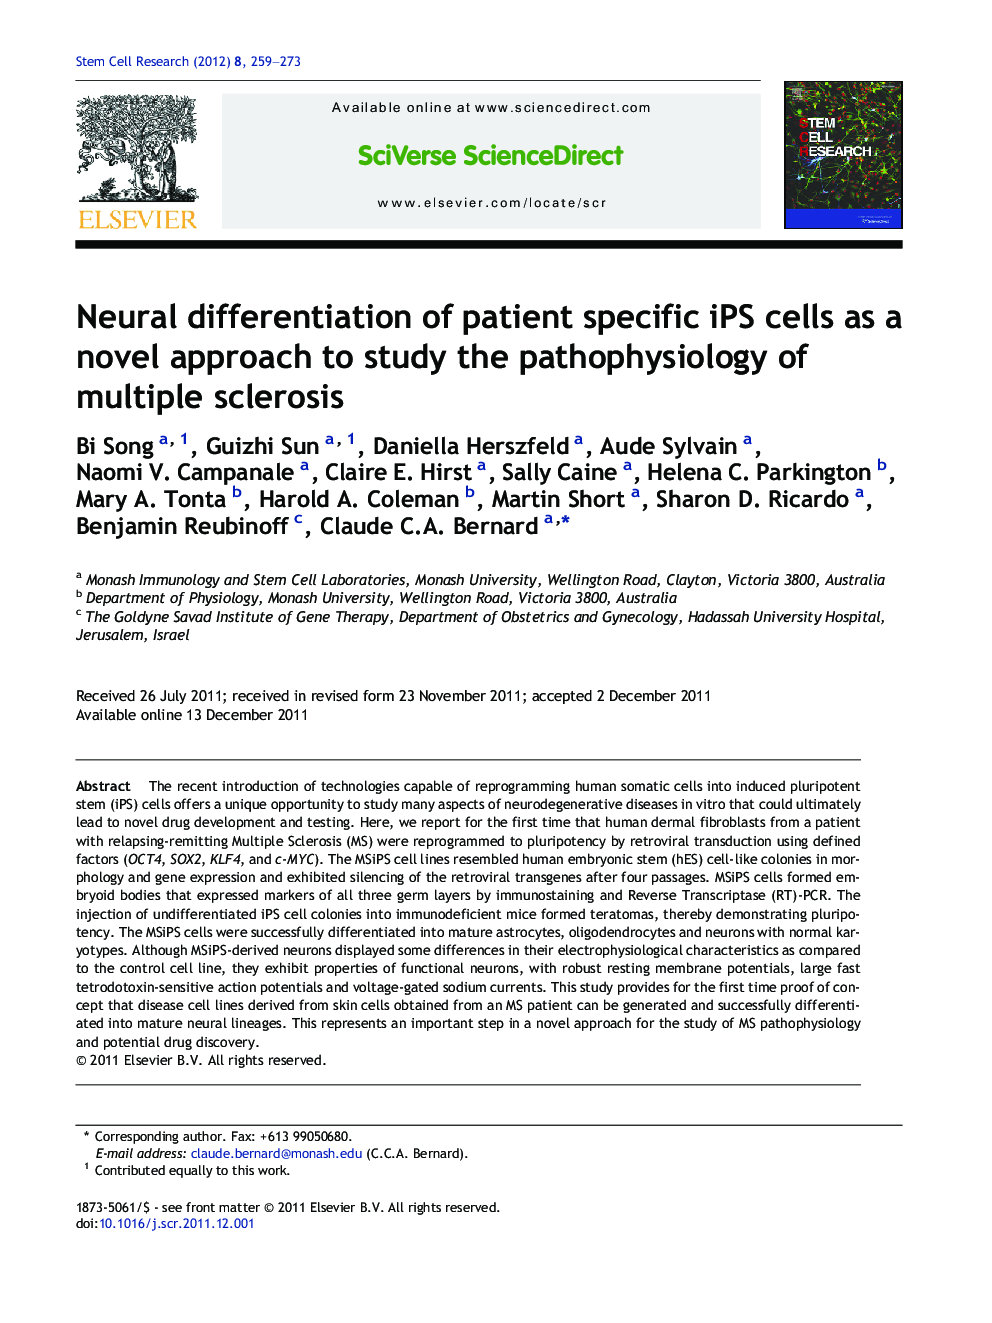 Neural differentiation of patient specific iPS cells as a novel approach to study the pathophysiology of multiple sclerosis